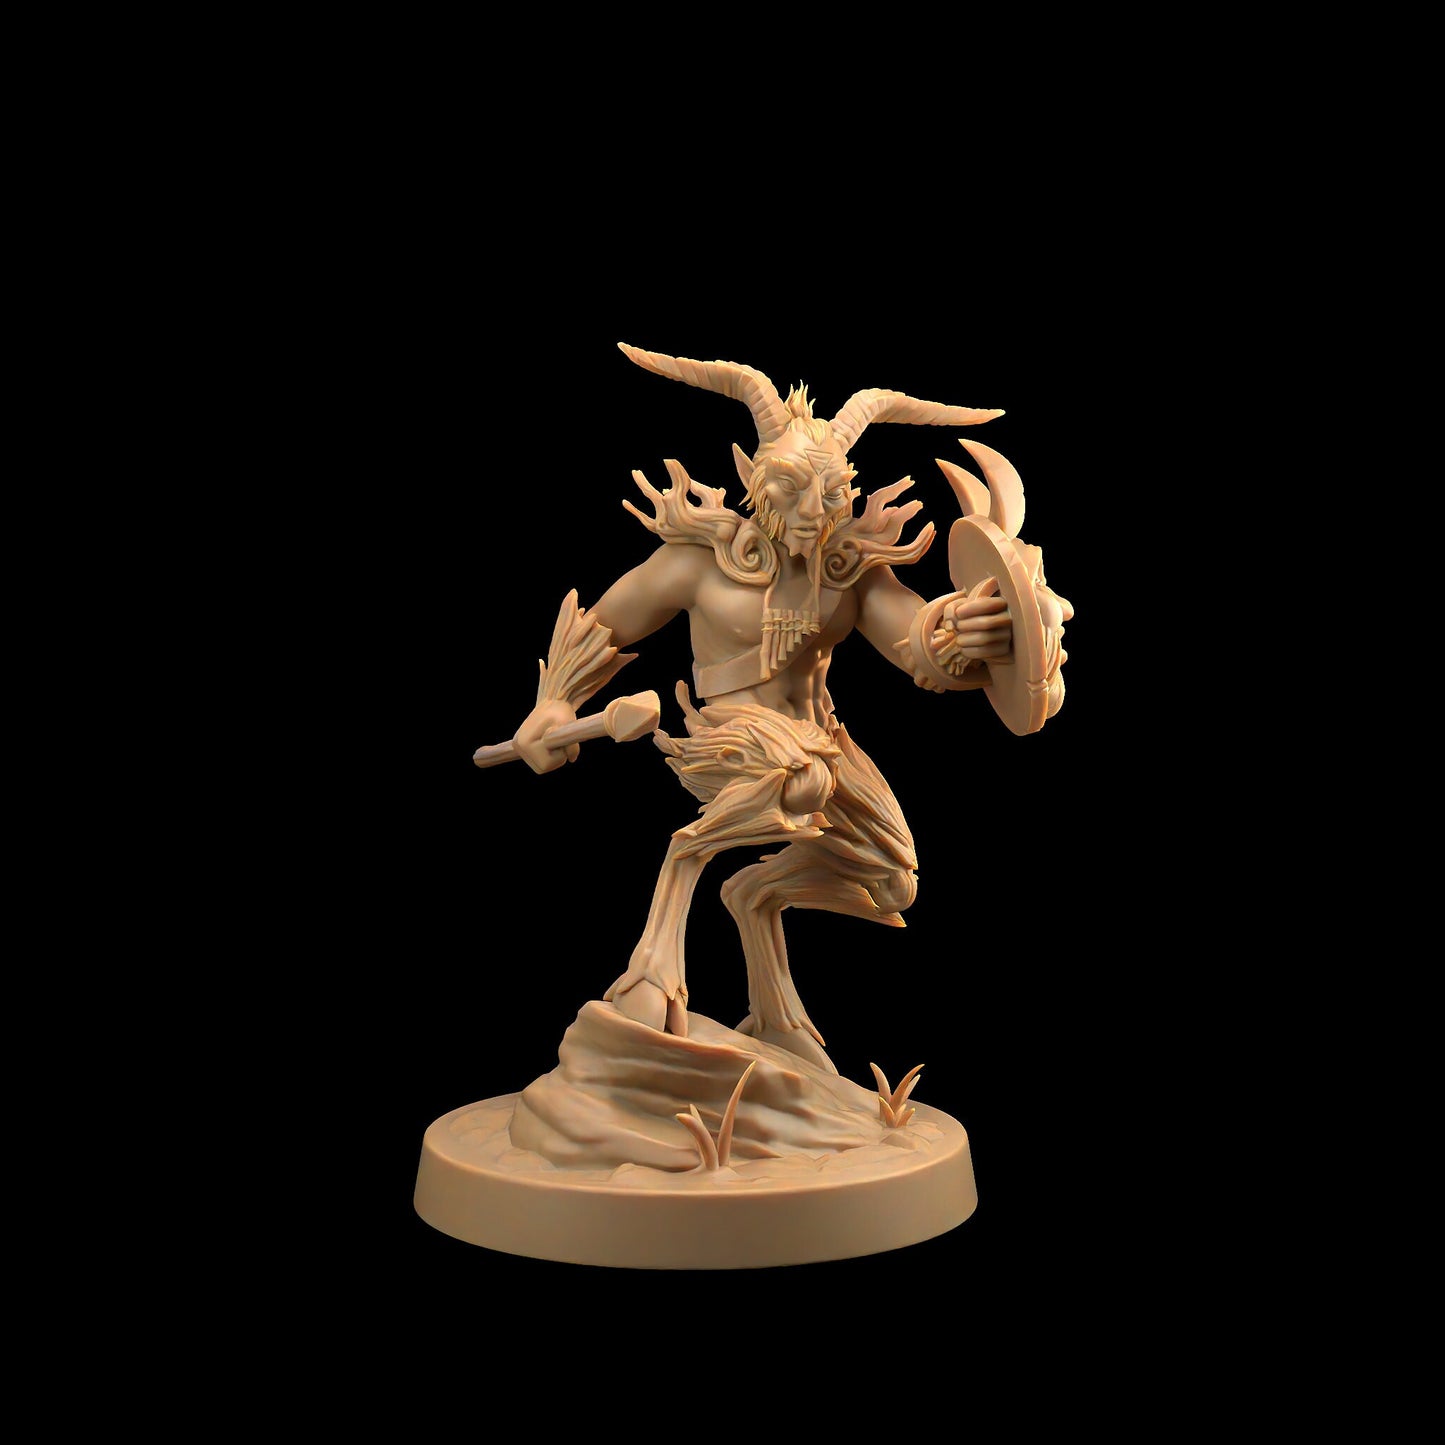 Modular Fauns | RPG Miniature for Dungeons and Dragons|Pathfinder|Tabletop Wargaming | Fey Miniature | Dragon Trappers Lodge